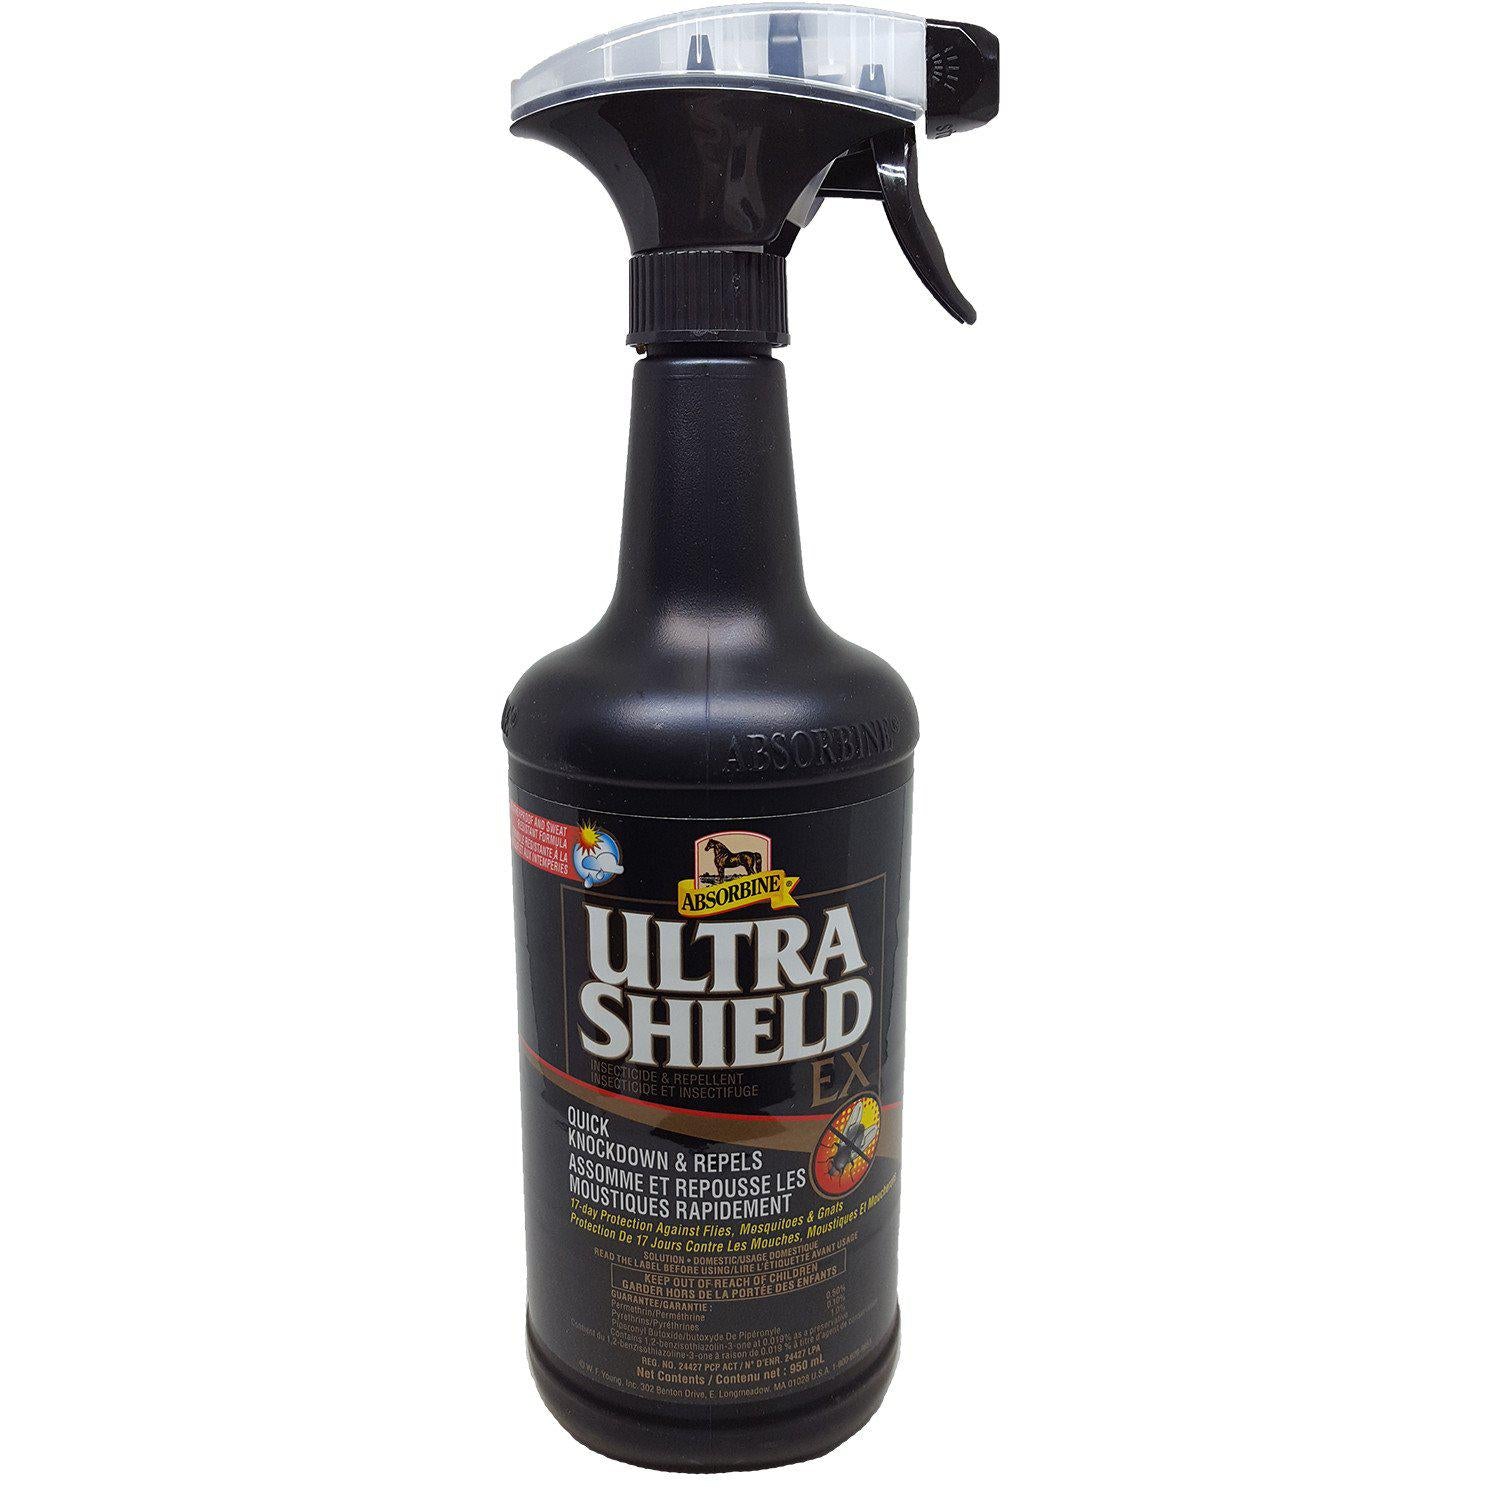 Absorbine® UltraShield® EX Insecticide & Repellent 950ml - Critter Country Supply Ltd.